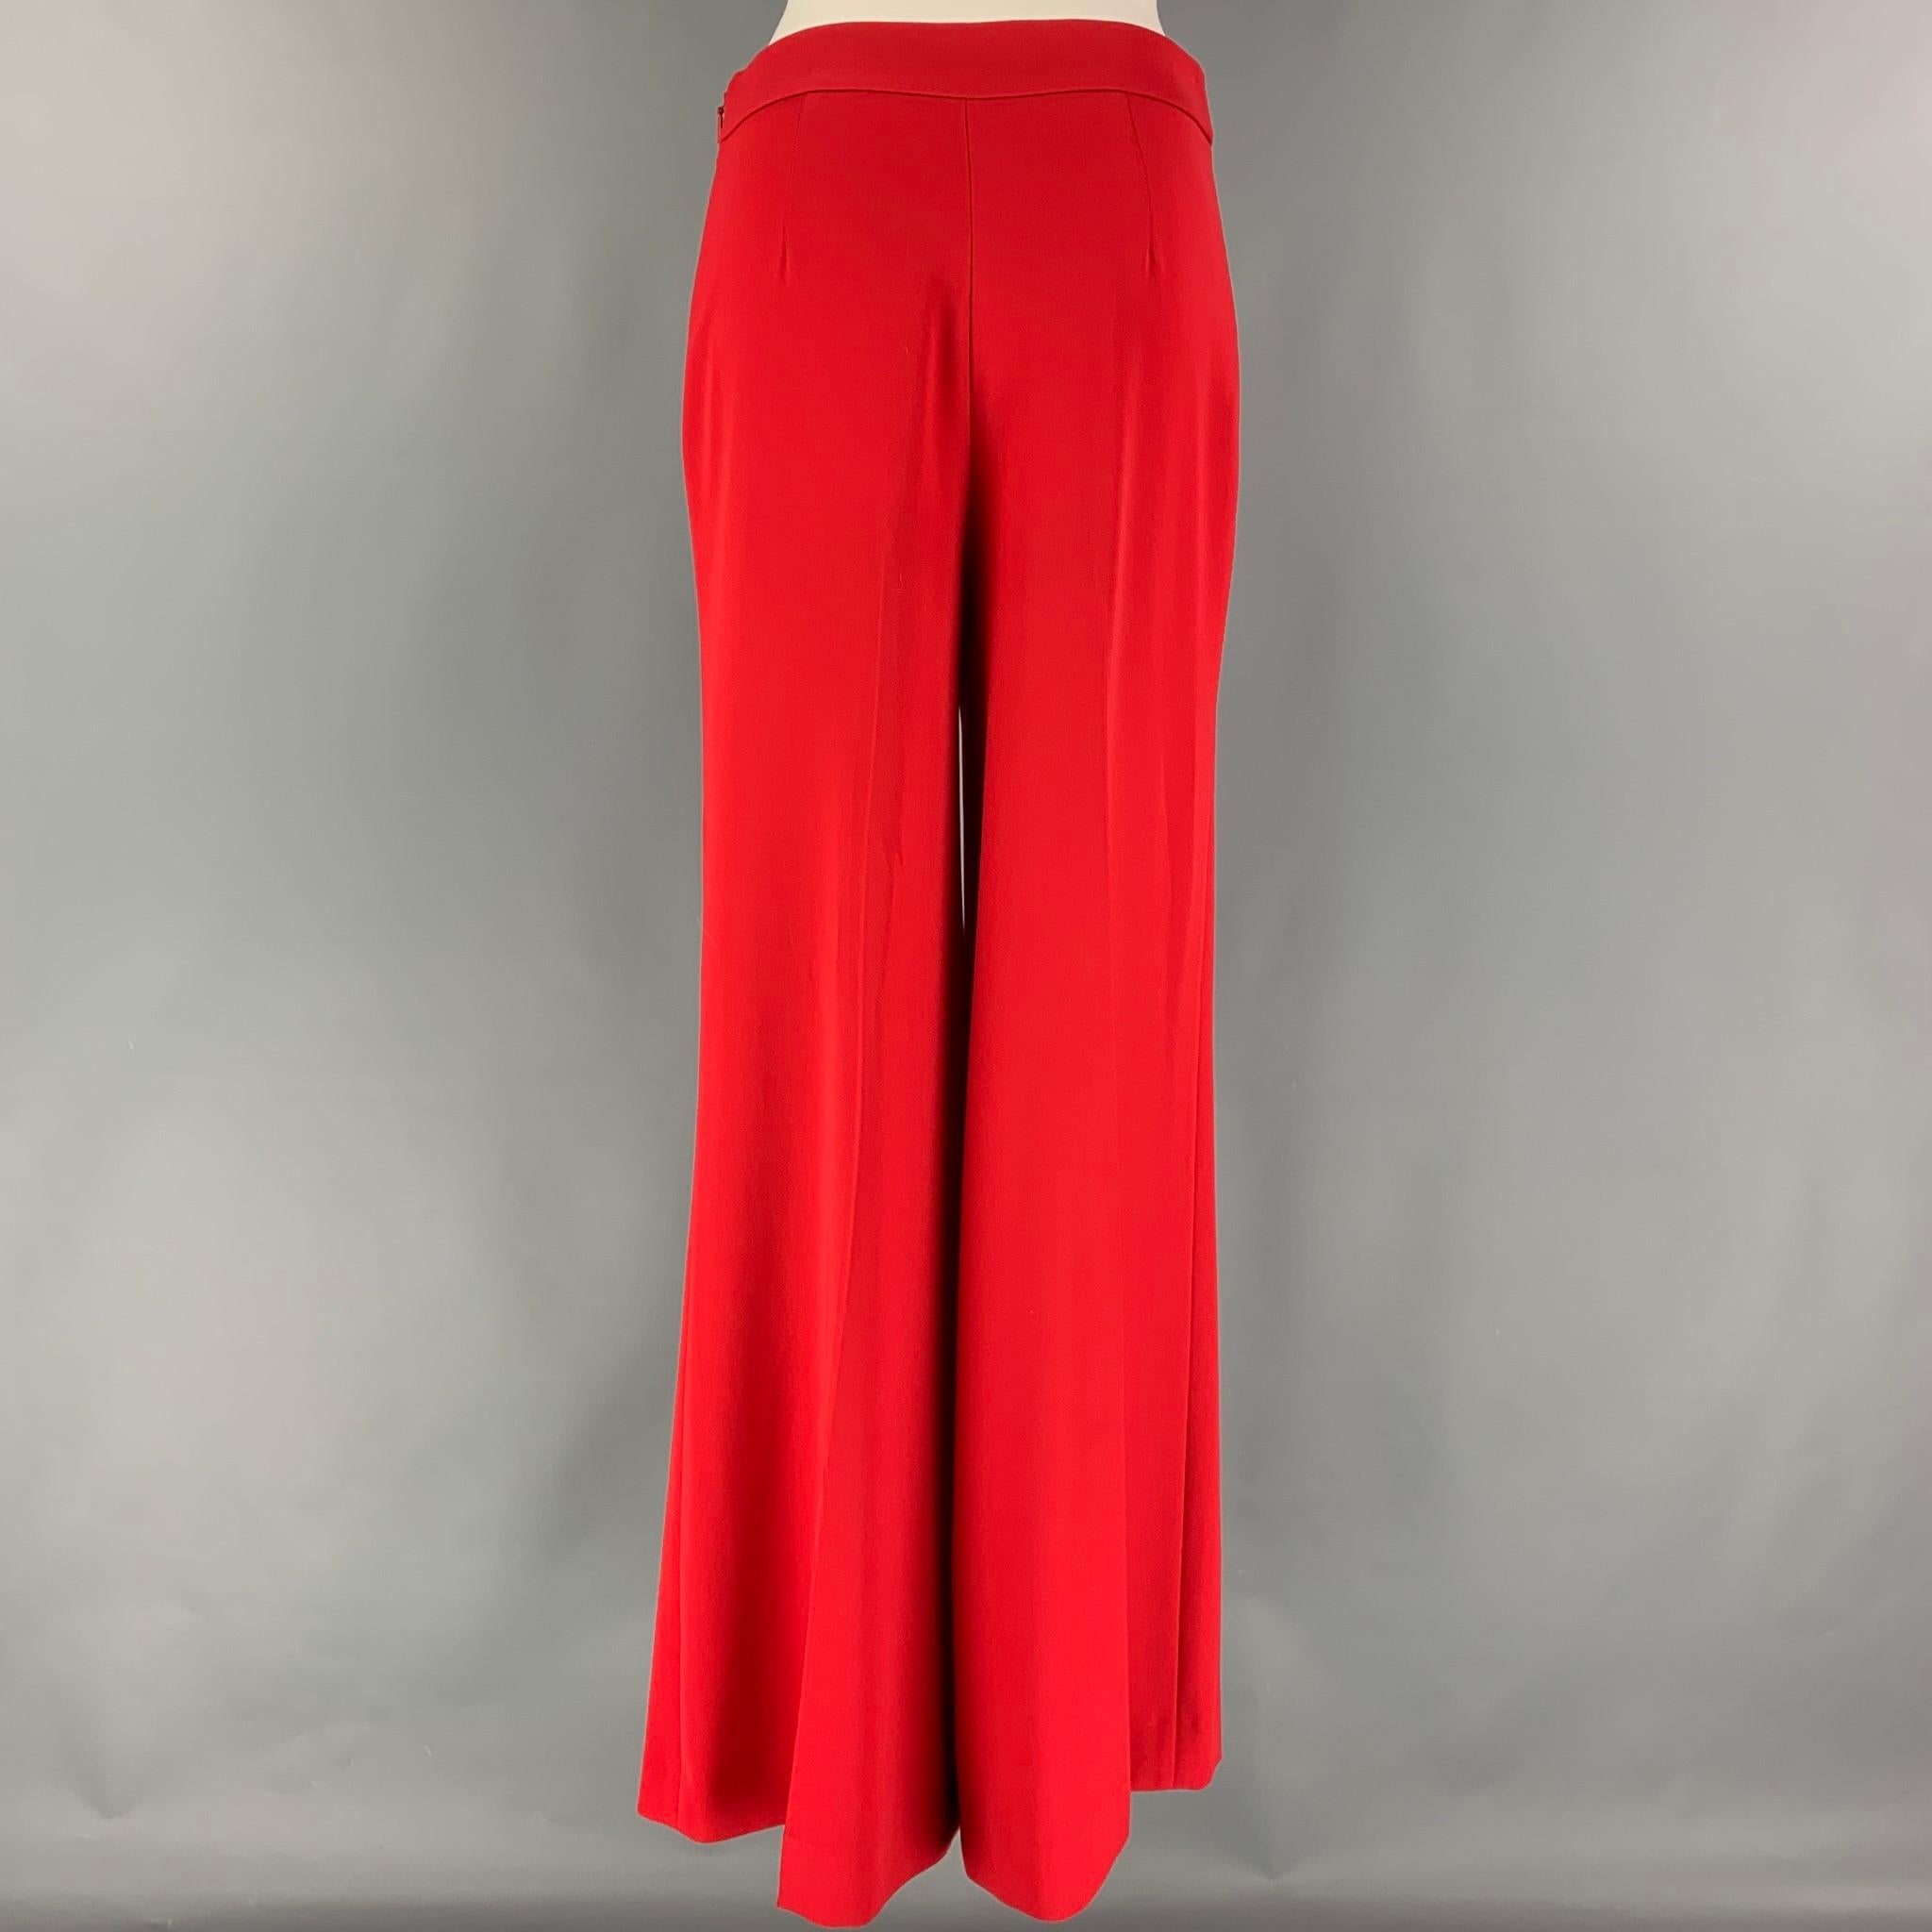 CAROLINA HERRERA pants comes in a red polyester featuring a wide leg style, high waist, and a side zipper closure. 

Very Good Pre-Owned Condition.
Marked: 4

Measurements:

Waist: 29 in.
Rise: 13.5 in.
Inseam: 33 in. 